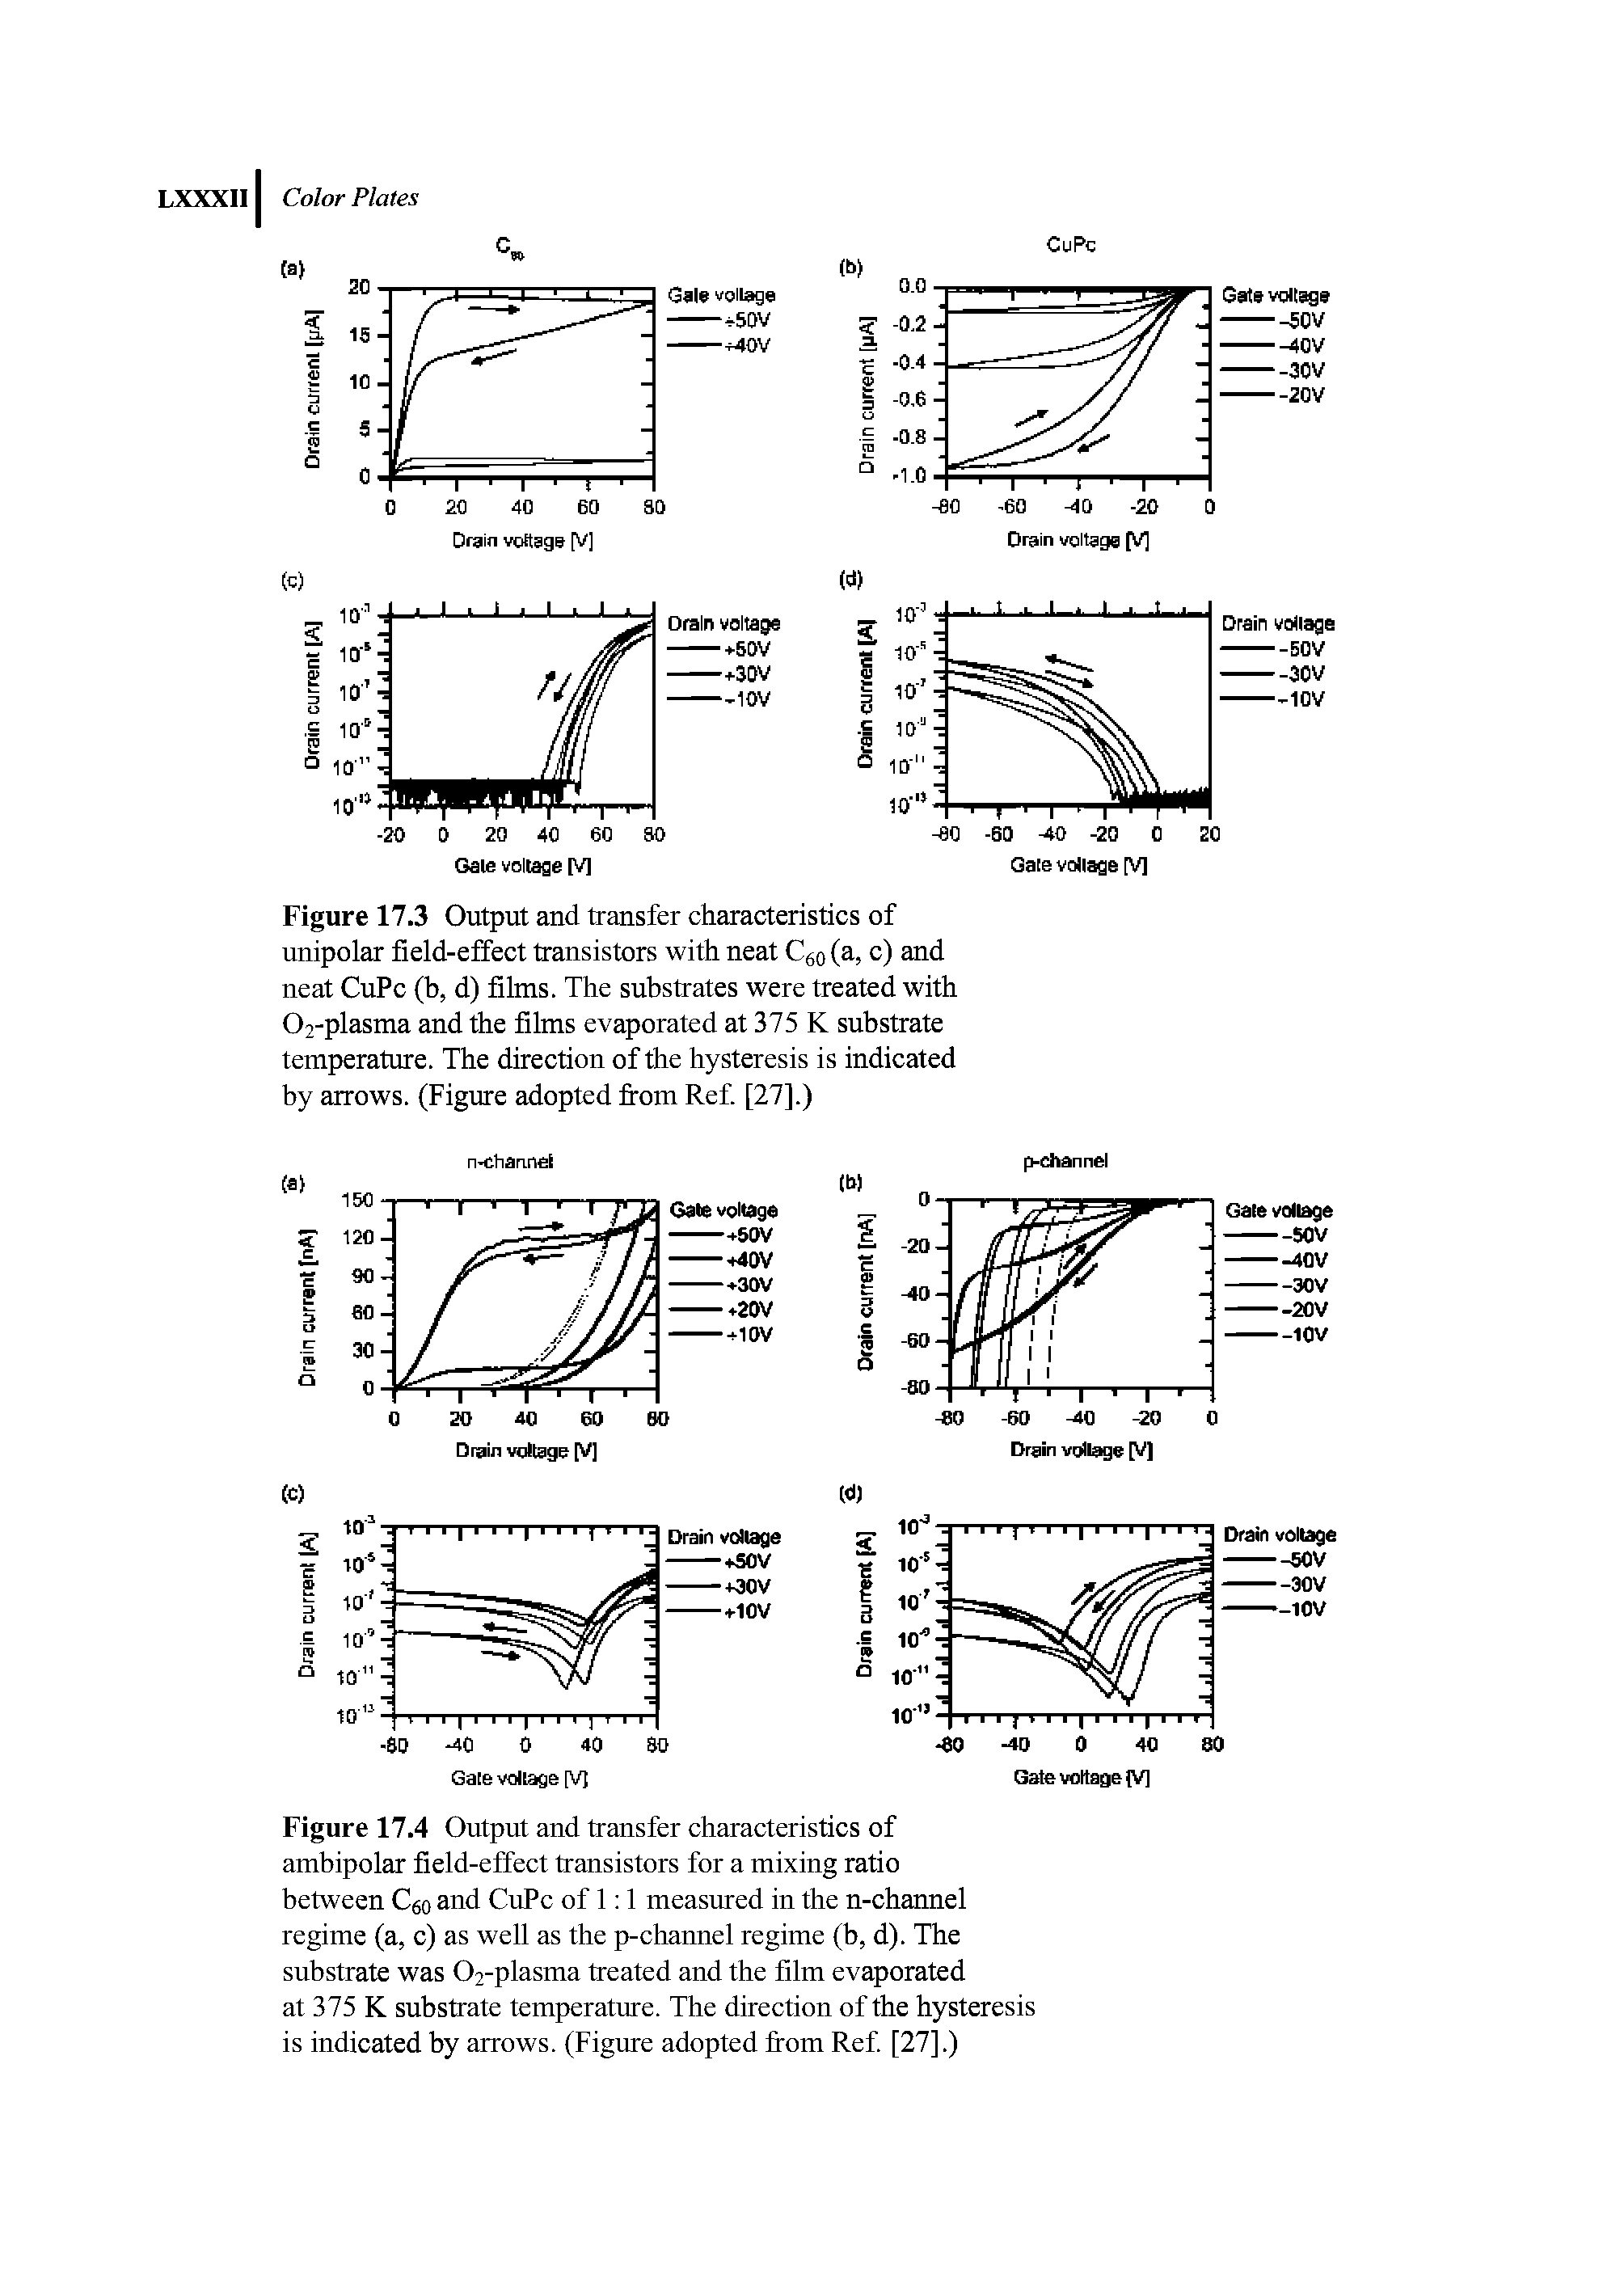 Figure 17.3 Output and transfer characteristics of unipolar field-effect transistors with neat Cso (a, c) and neat CuPc (b, d) films. The substrates were treated with 02-plasma and the films evaporated at 375 K substrate temperature. The direction of the hysteresis is indicated by arrows. (Figure adopted from Ref. [27].)...